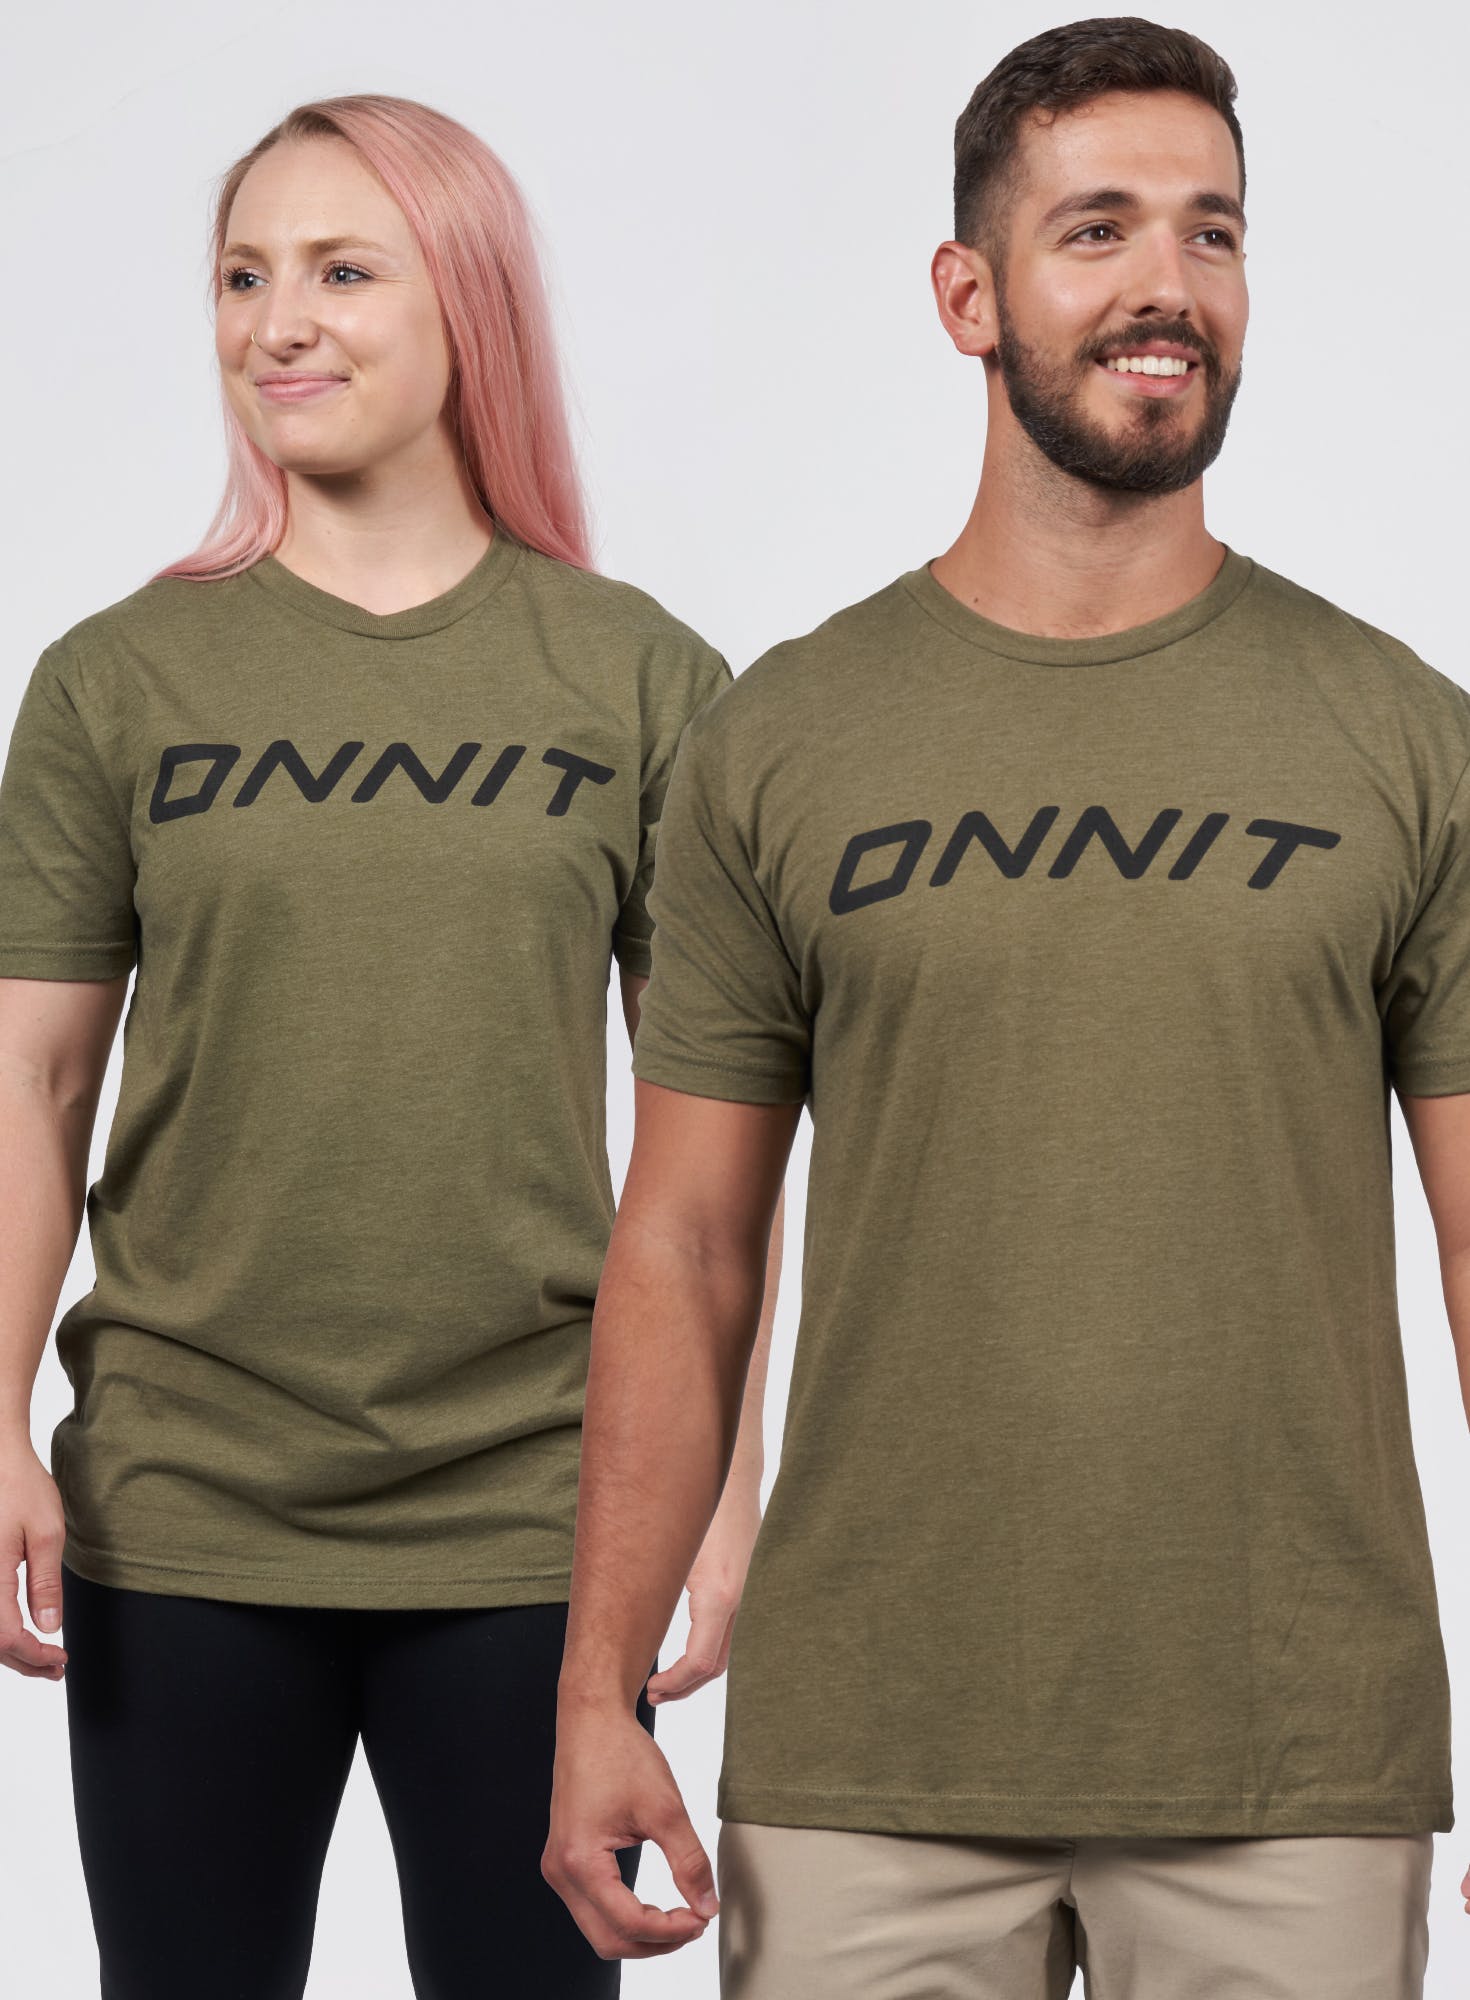 Onnit Type T-Shirt